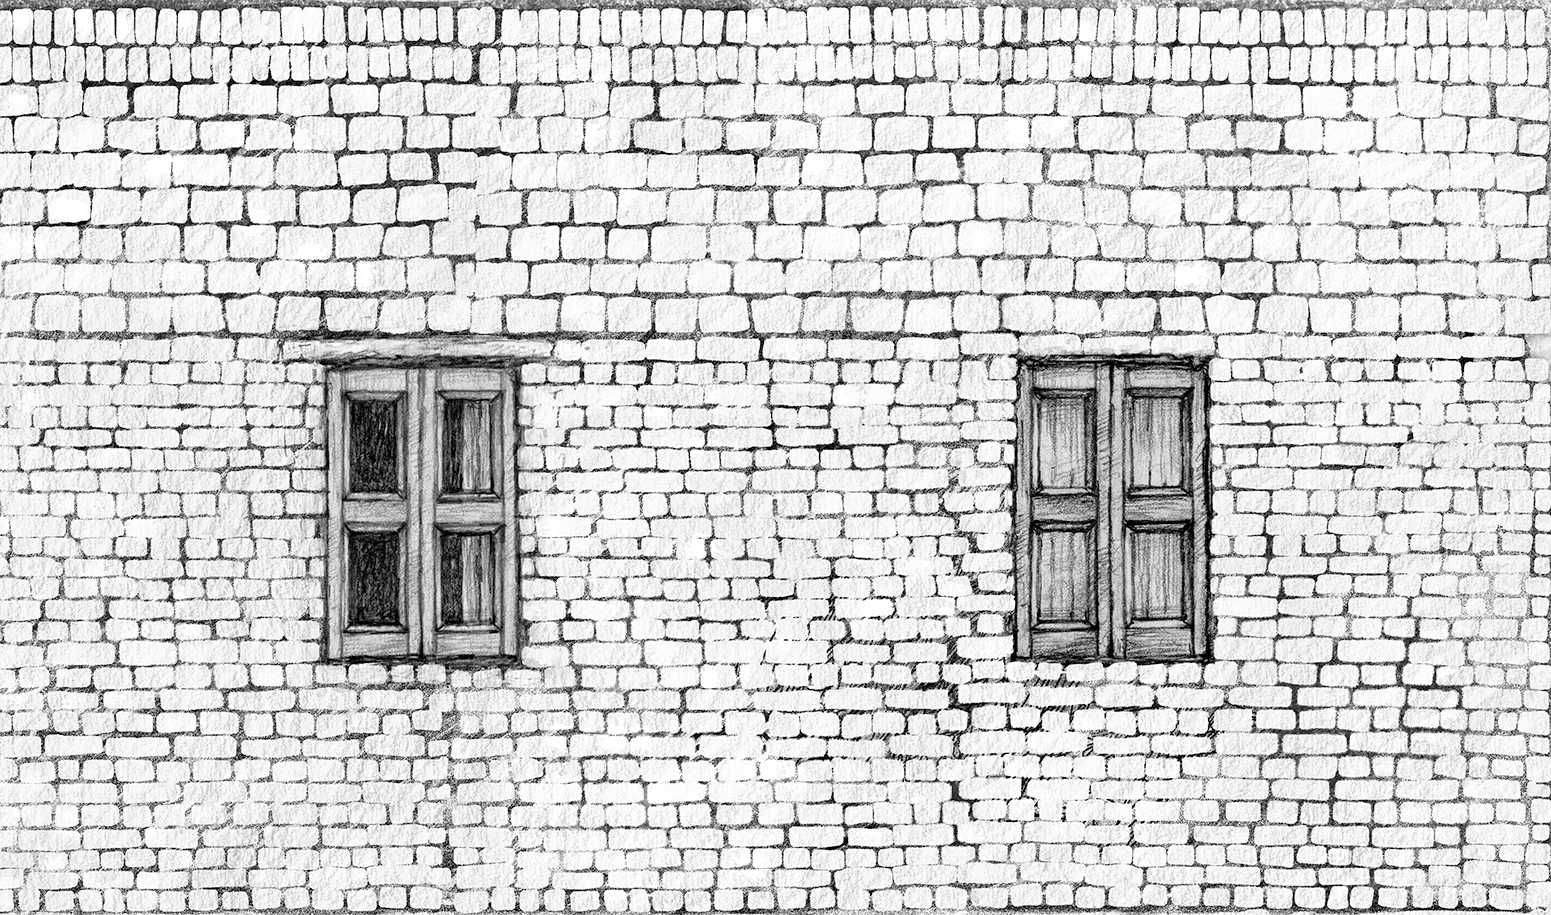 ‘Kaf El Amar’ – Film, Egypt  2011.

Brick wall with windows – scanned pencil drawings processed in Photoshop.